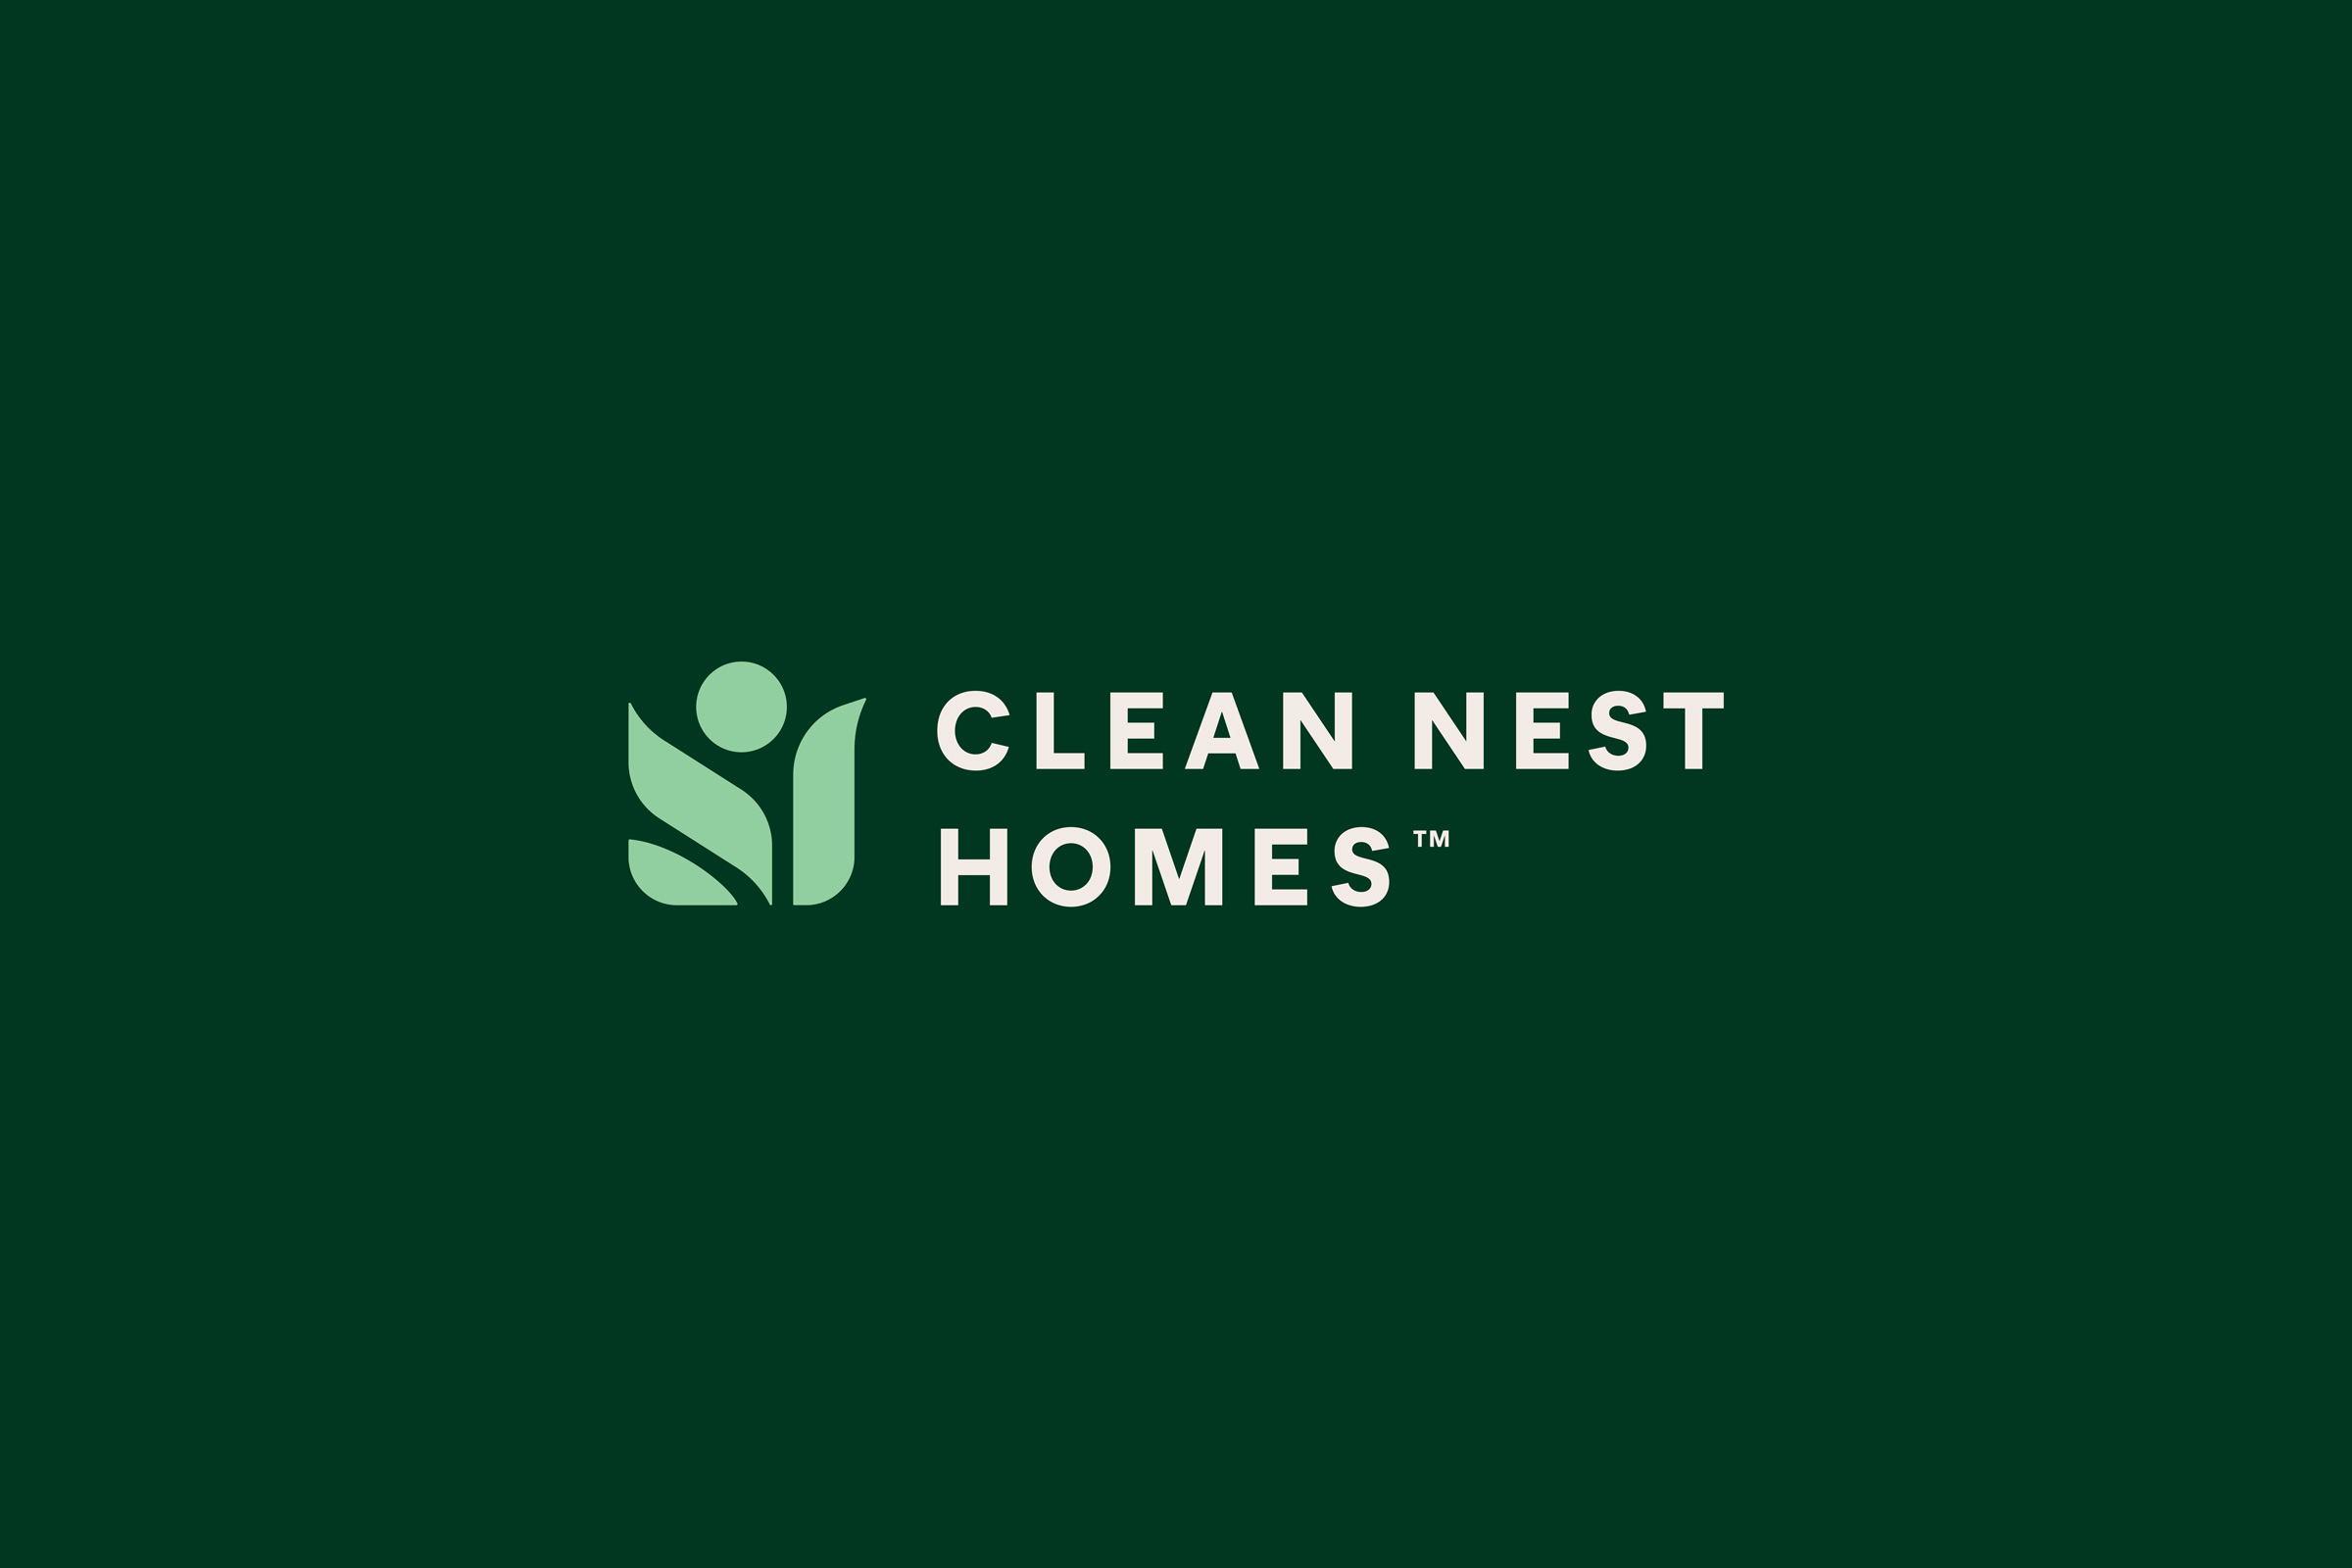 Clean Nest Homes: Redefining Clean with a Fresh Brand Identity for Eco-Friendly Living